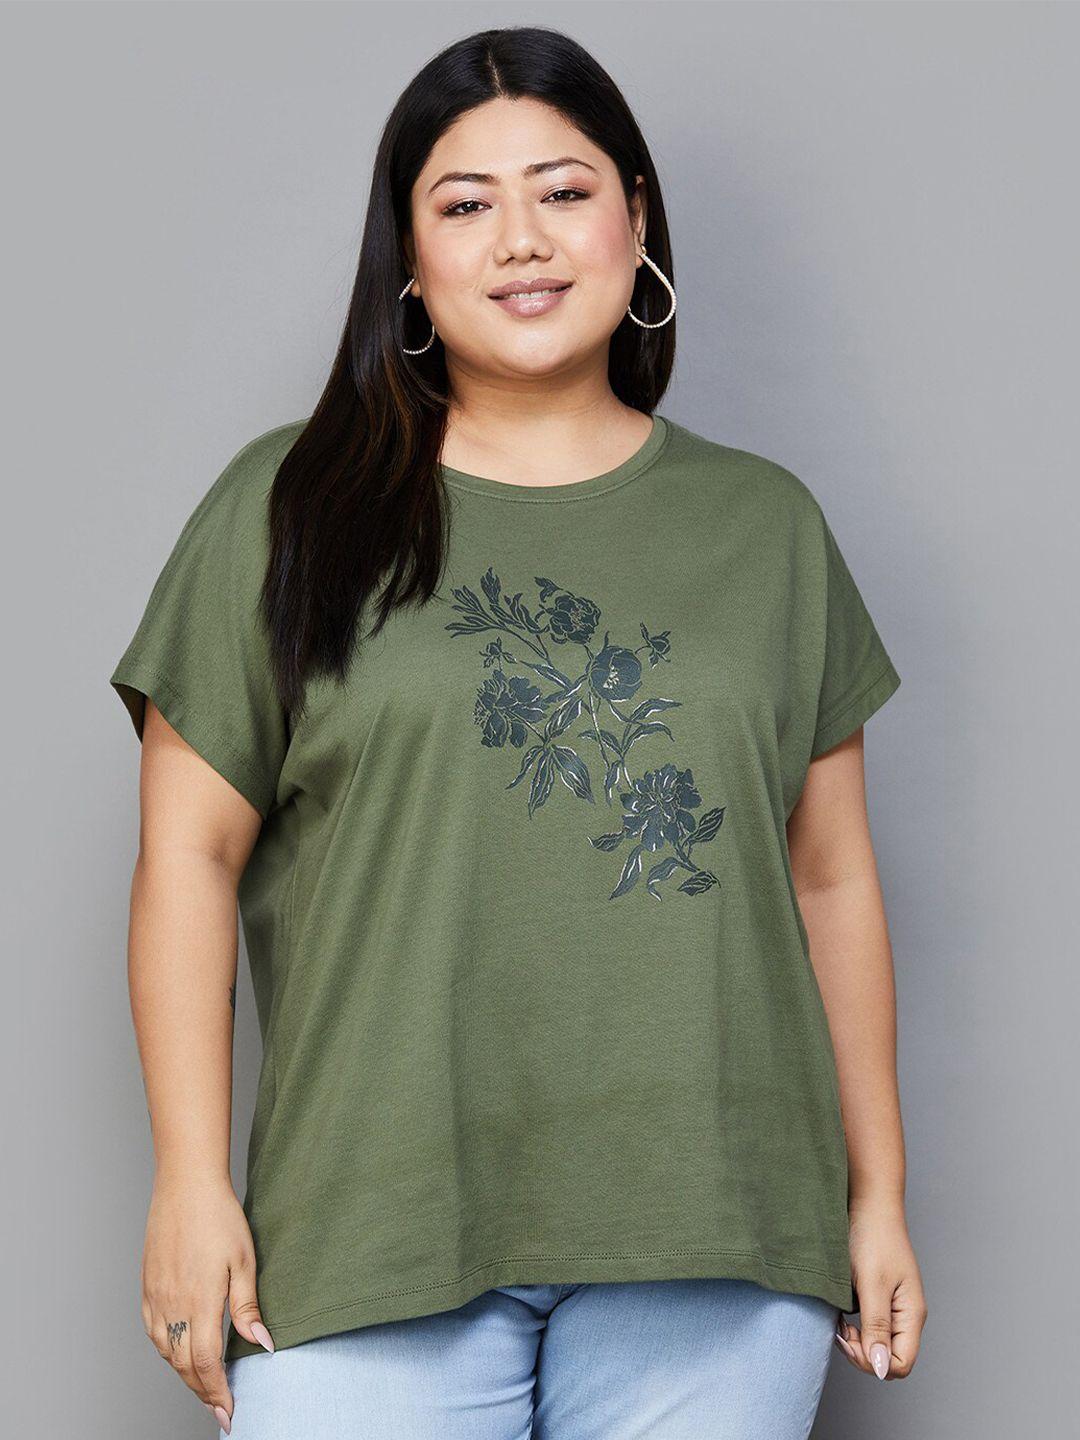 nexus-by-lifestyle-olive-green-print-cotton-short-top